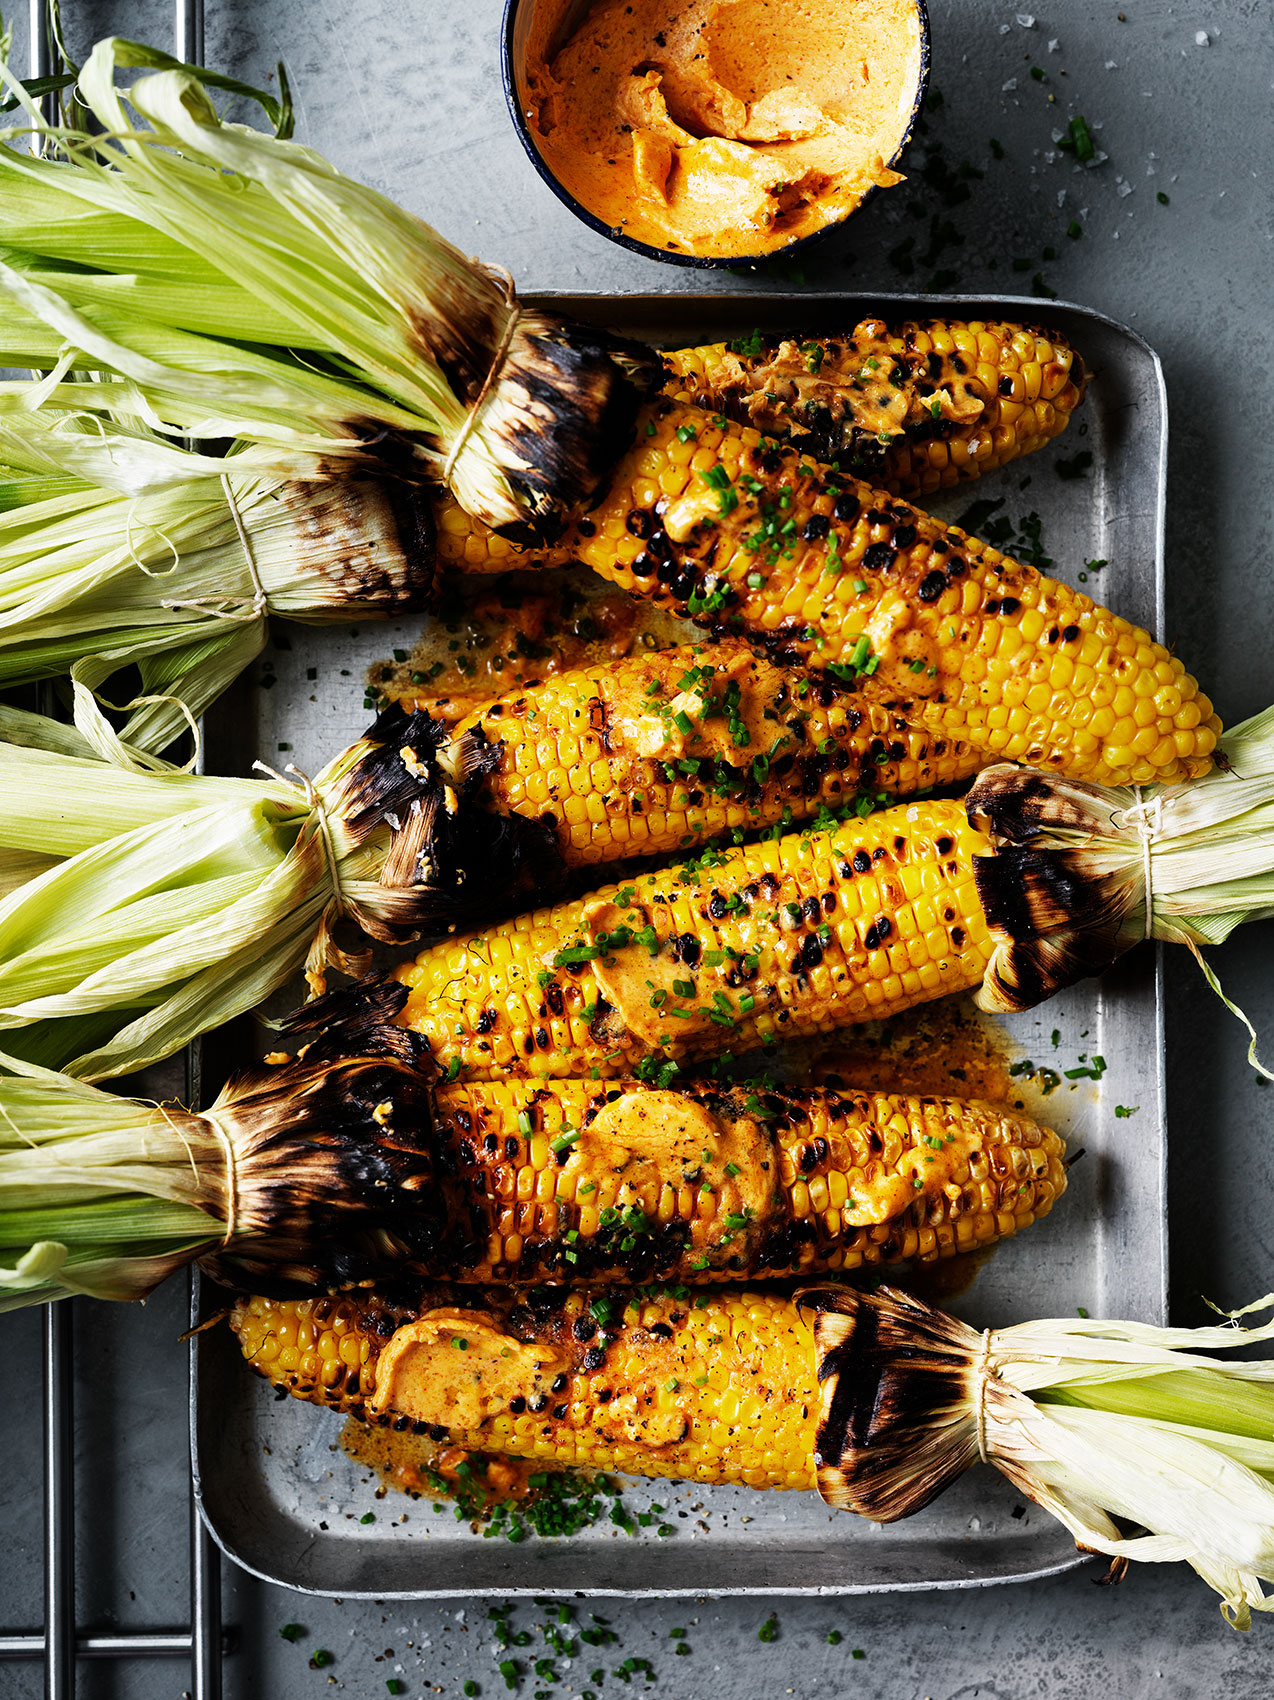 20220608_Grilled-corn-on-the-cob-with-chicken-salt-butter02